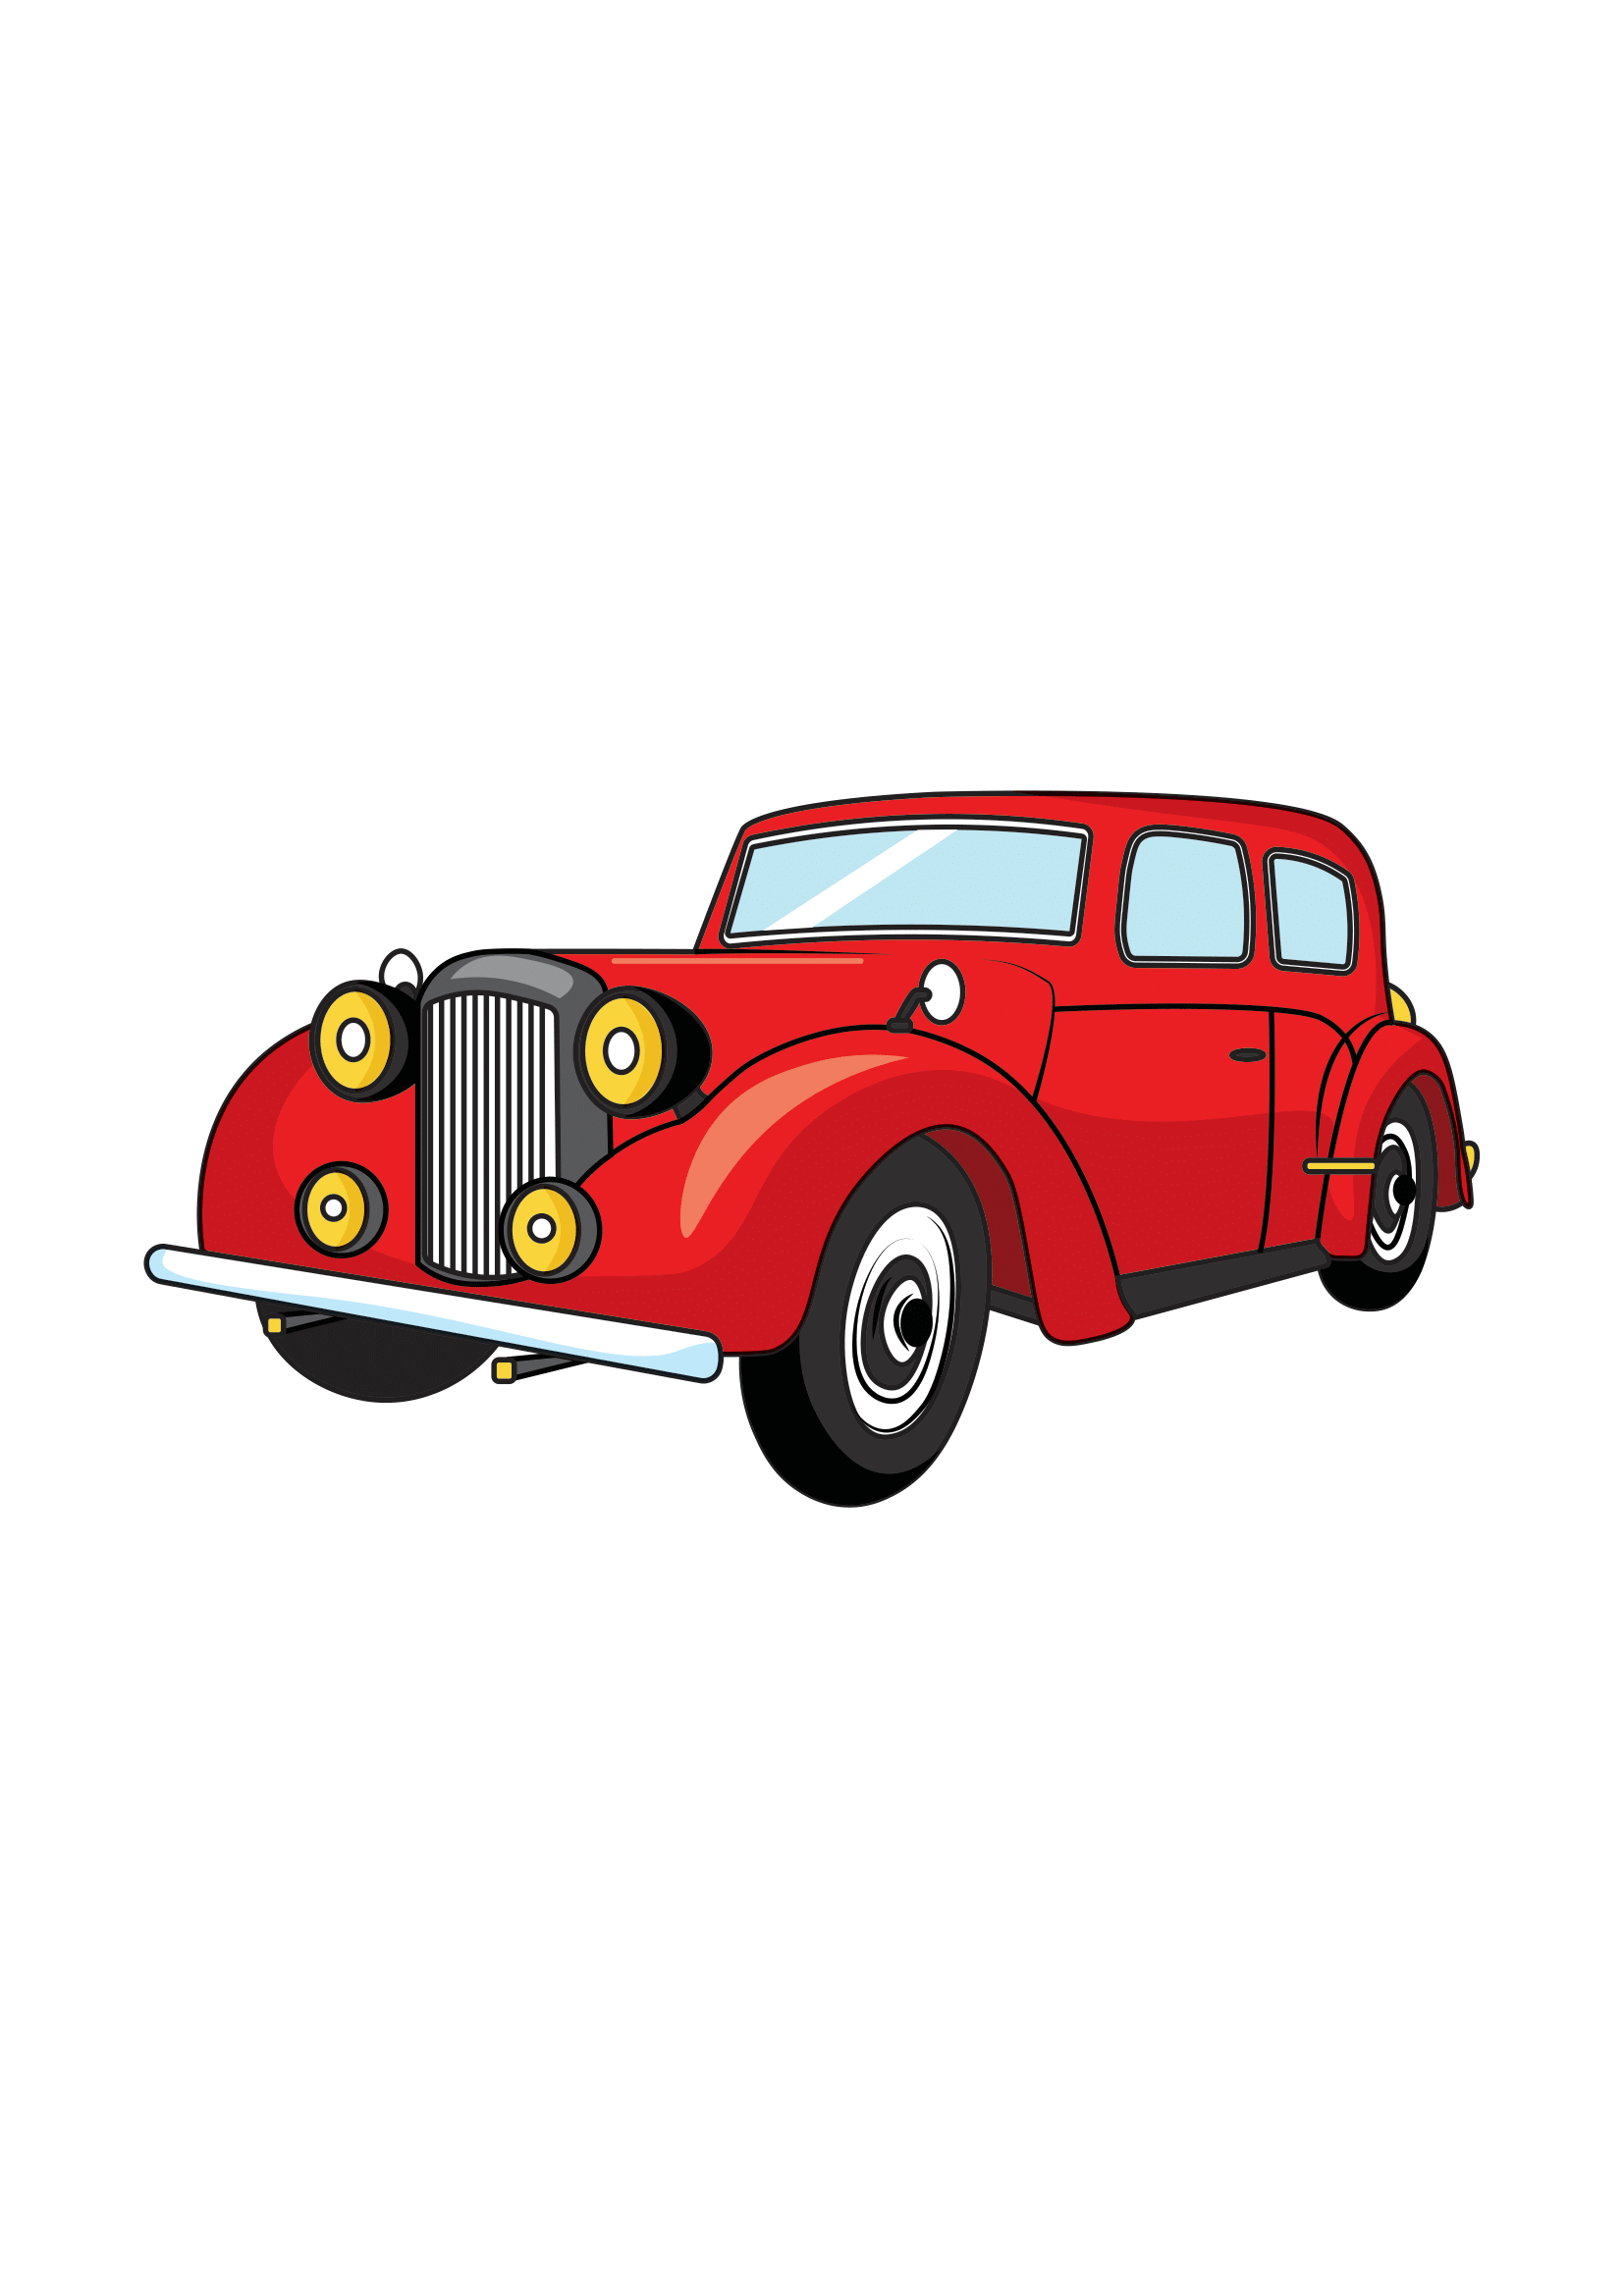 How to Draw A Vintage Car Step by Step Printable